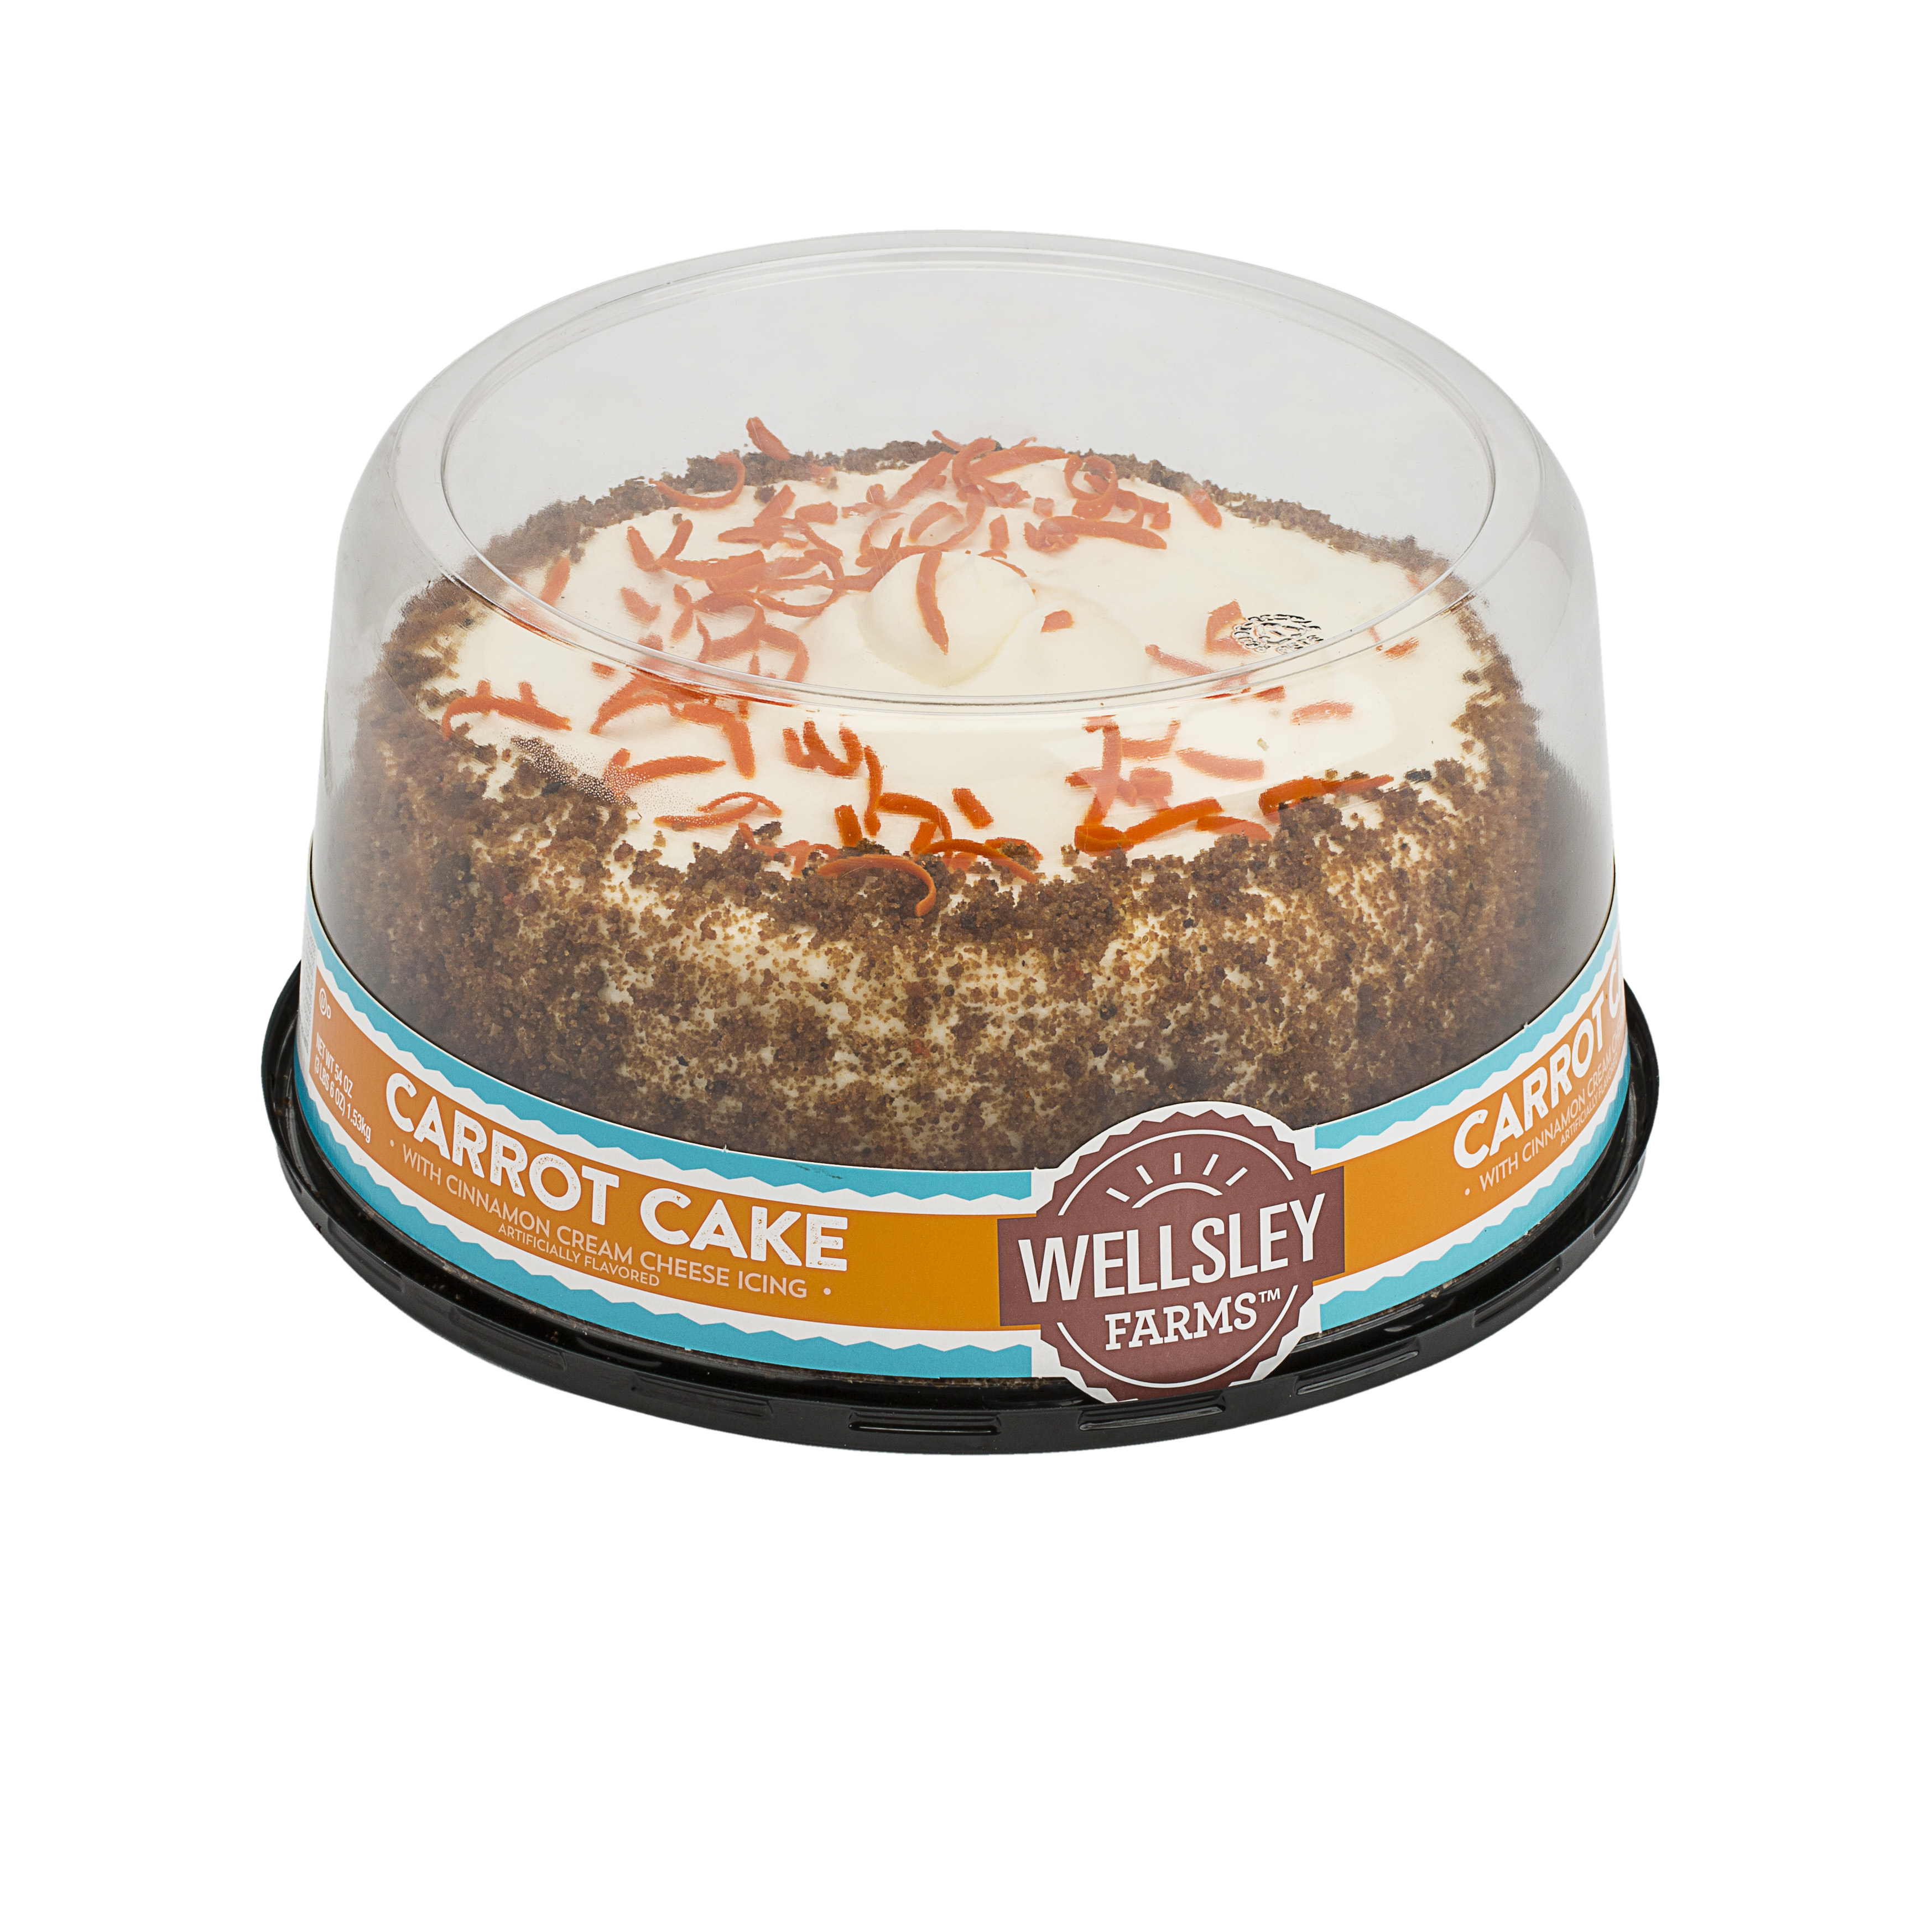 Crumbs Bake Shop Products Now Available at BJ's - Funtastic Life